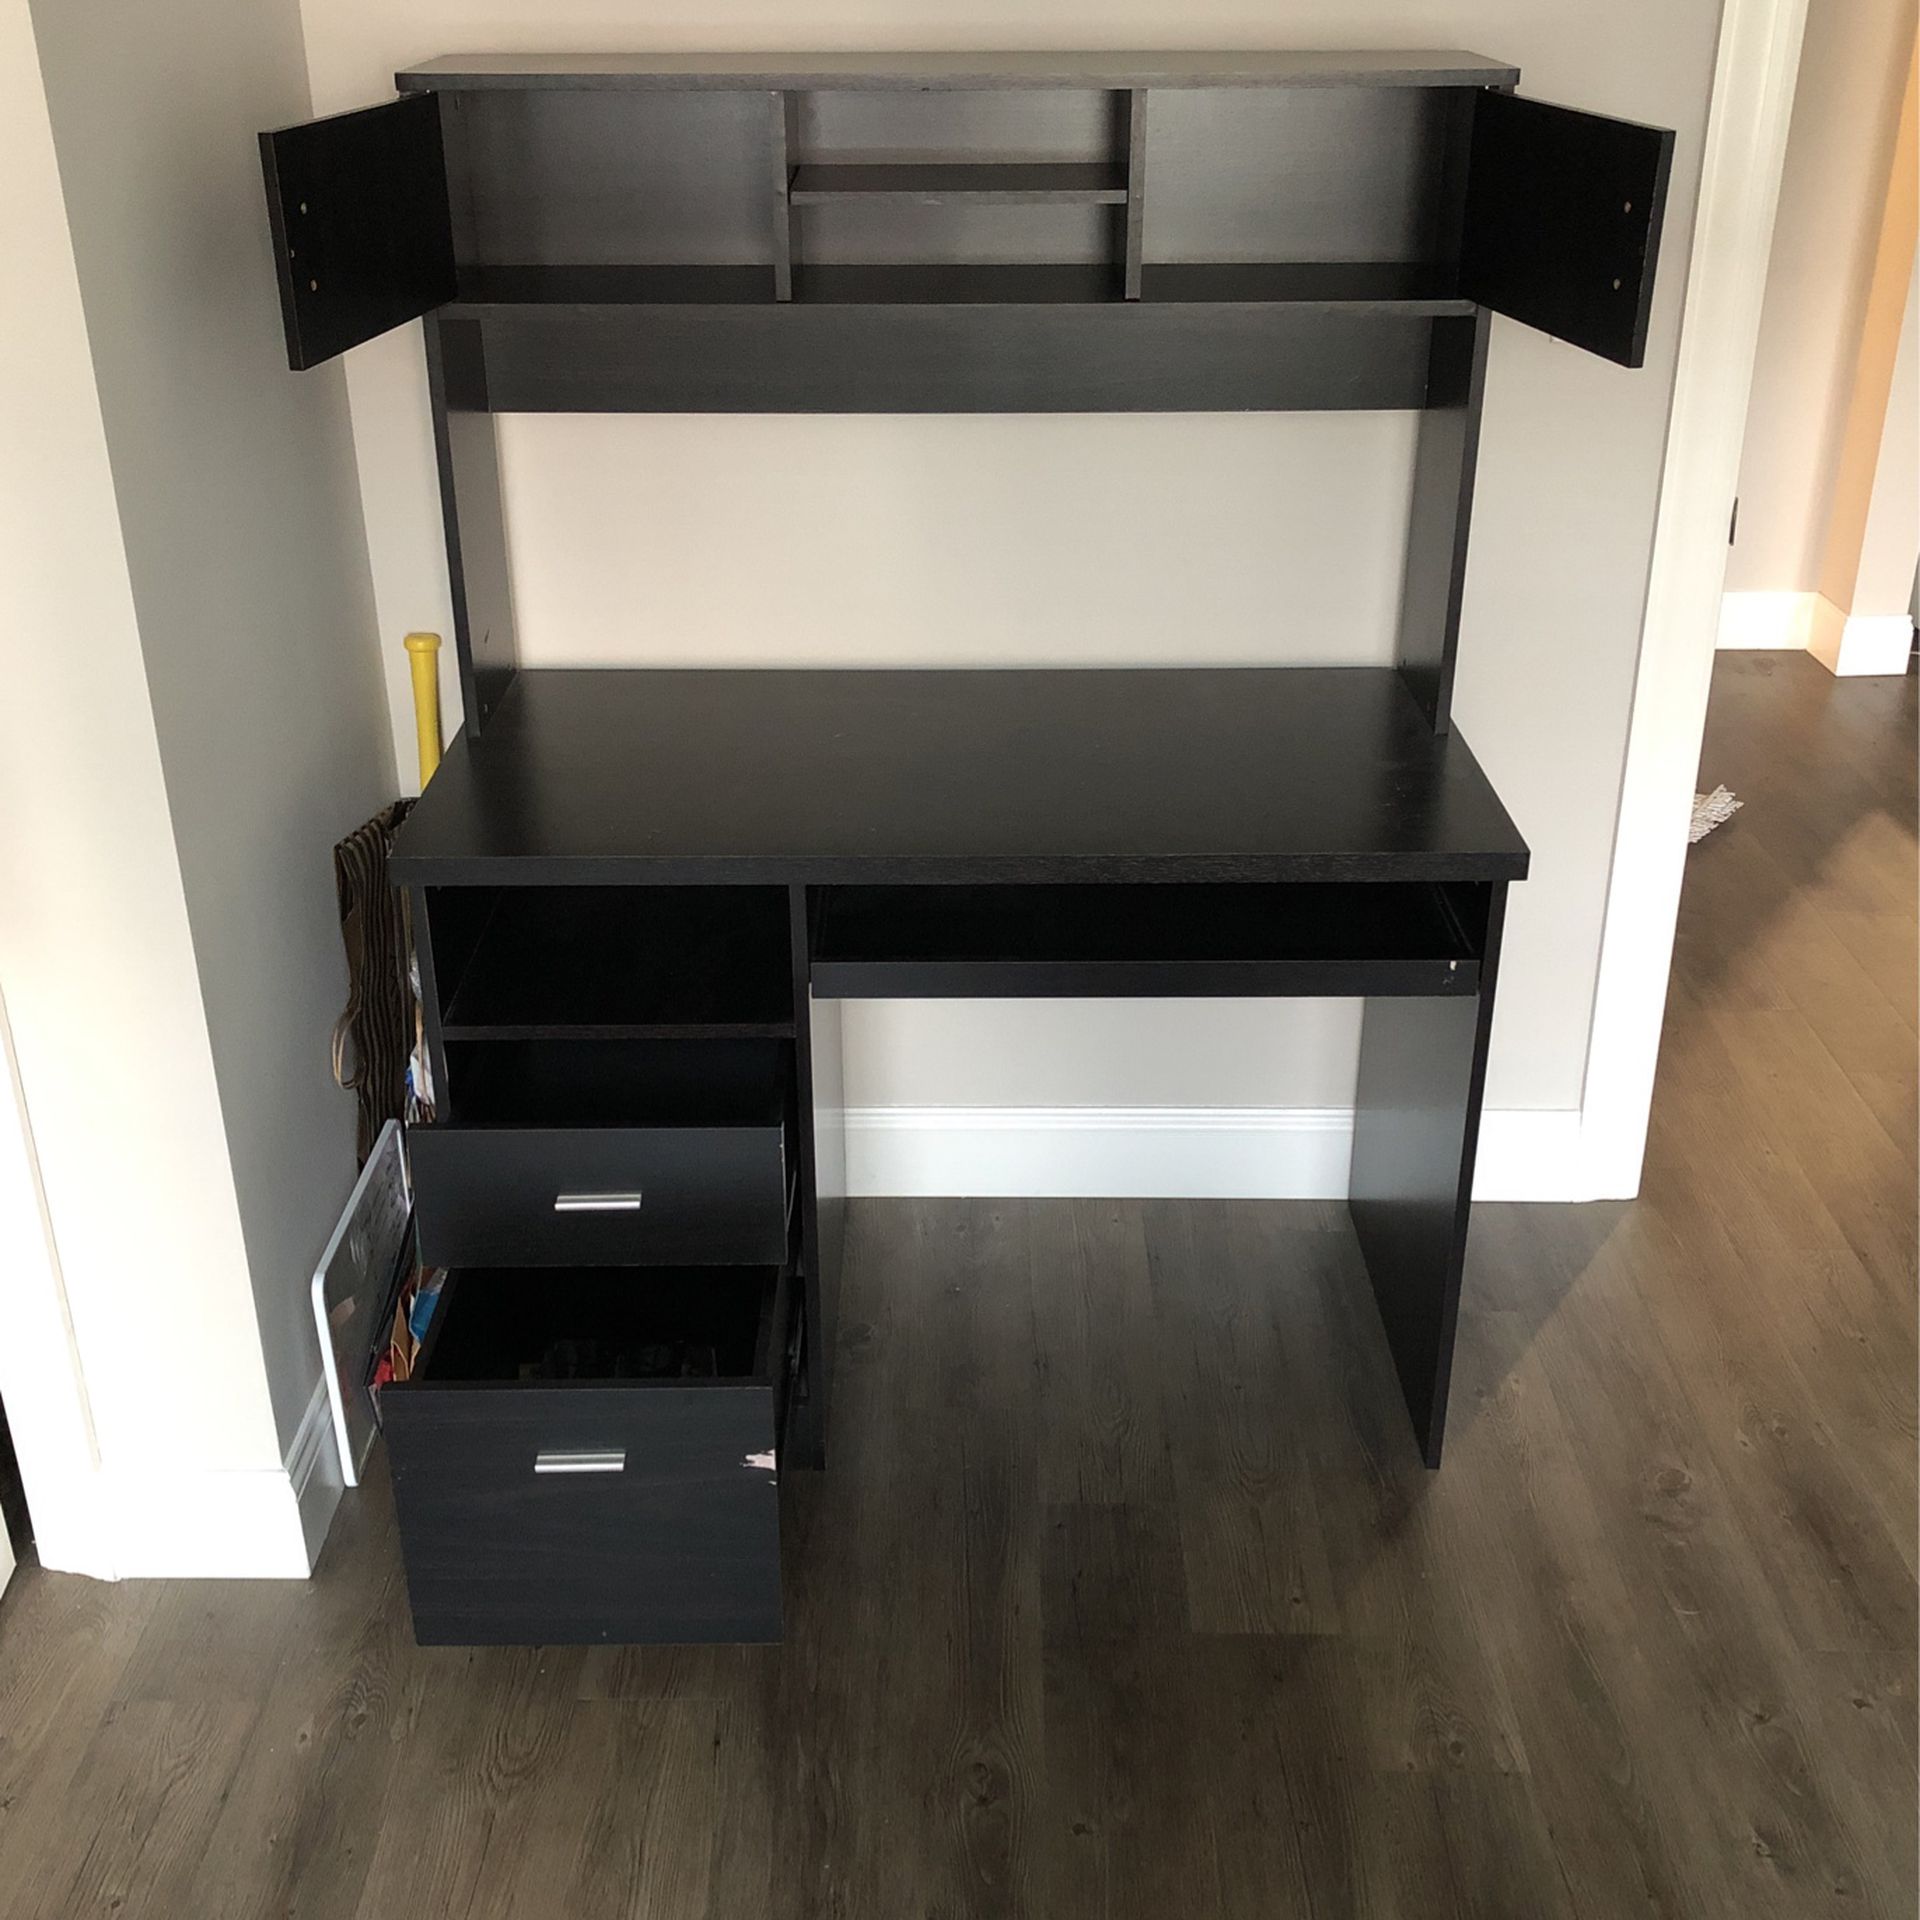 Black Wood Desk With Shelving Unit Attached